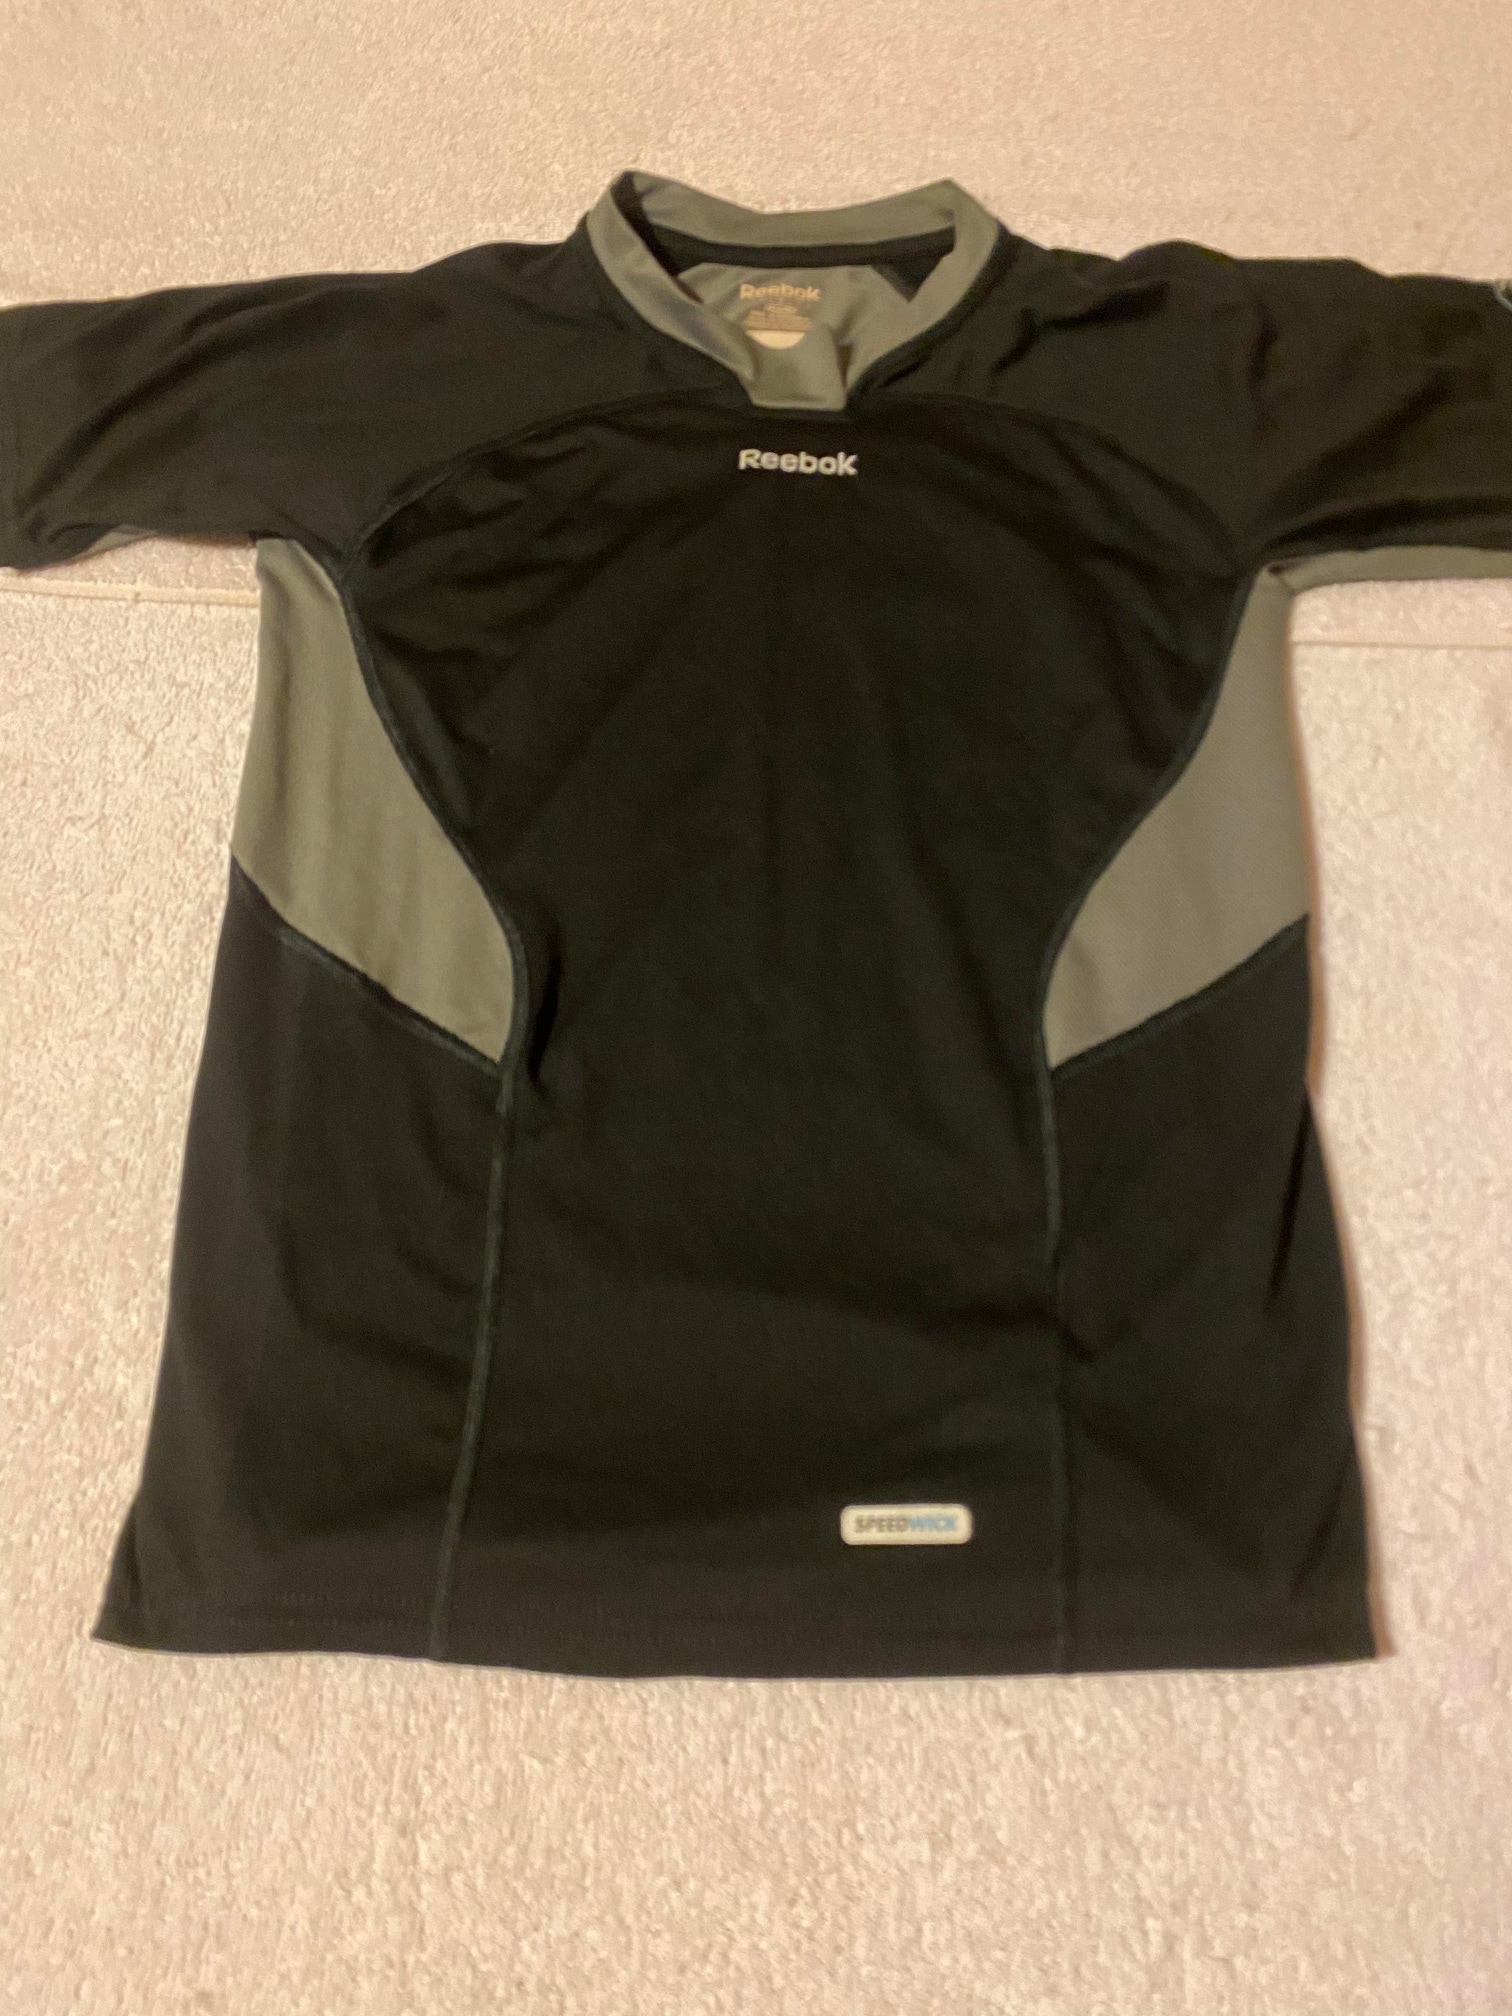 Reebok Play Dry Base Layer Short Sleeve Compression Shirt, Size Men’s Large